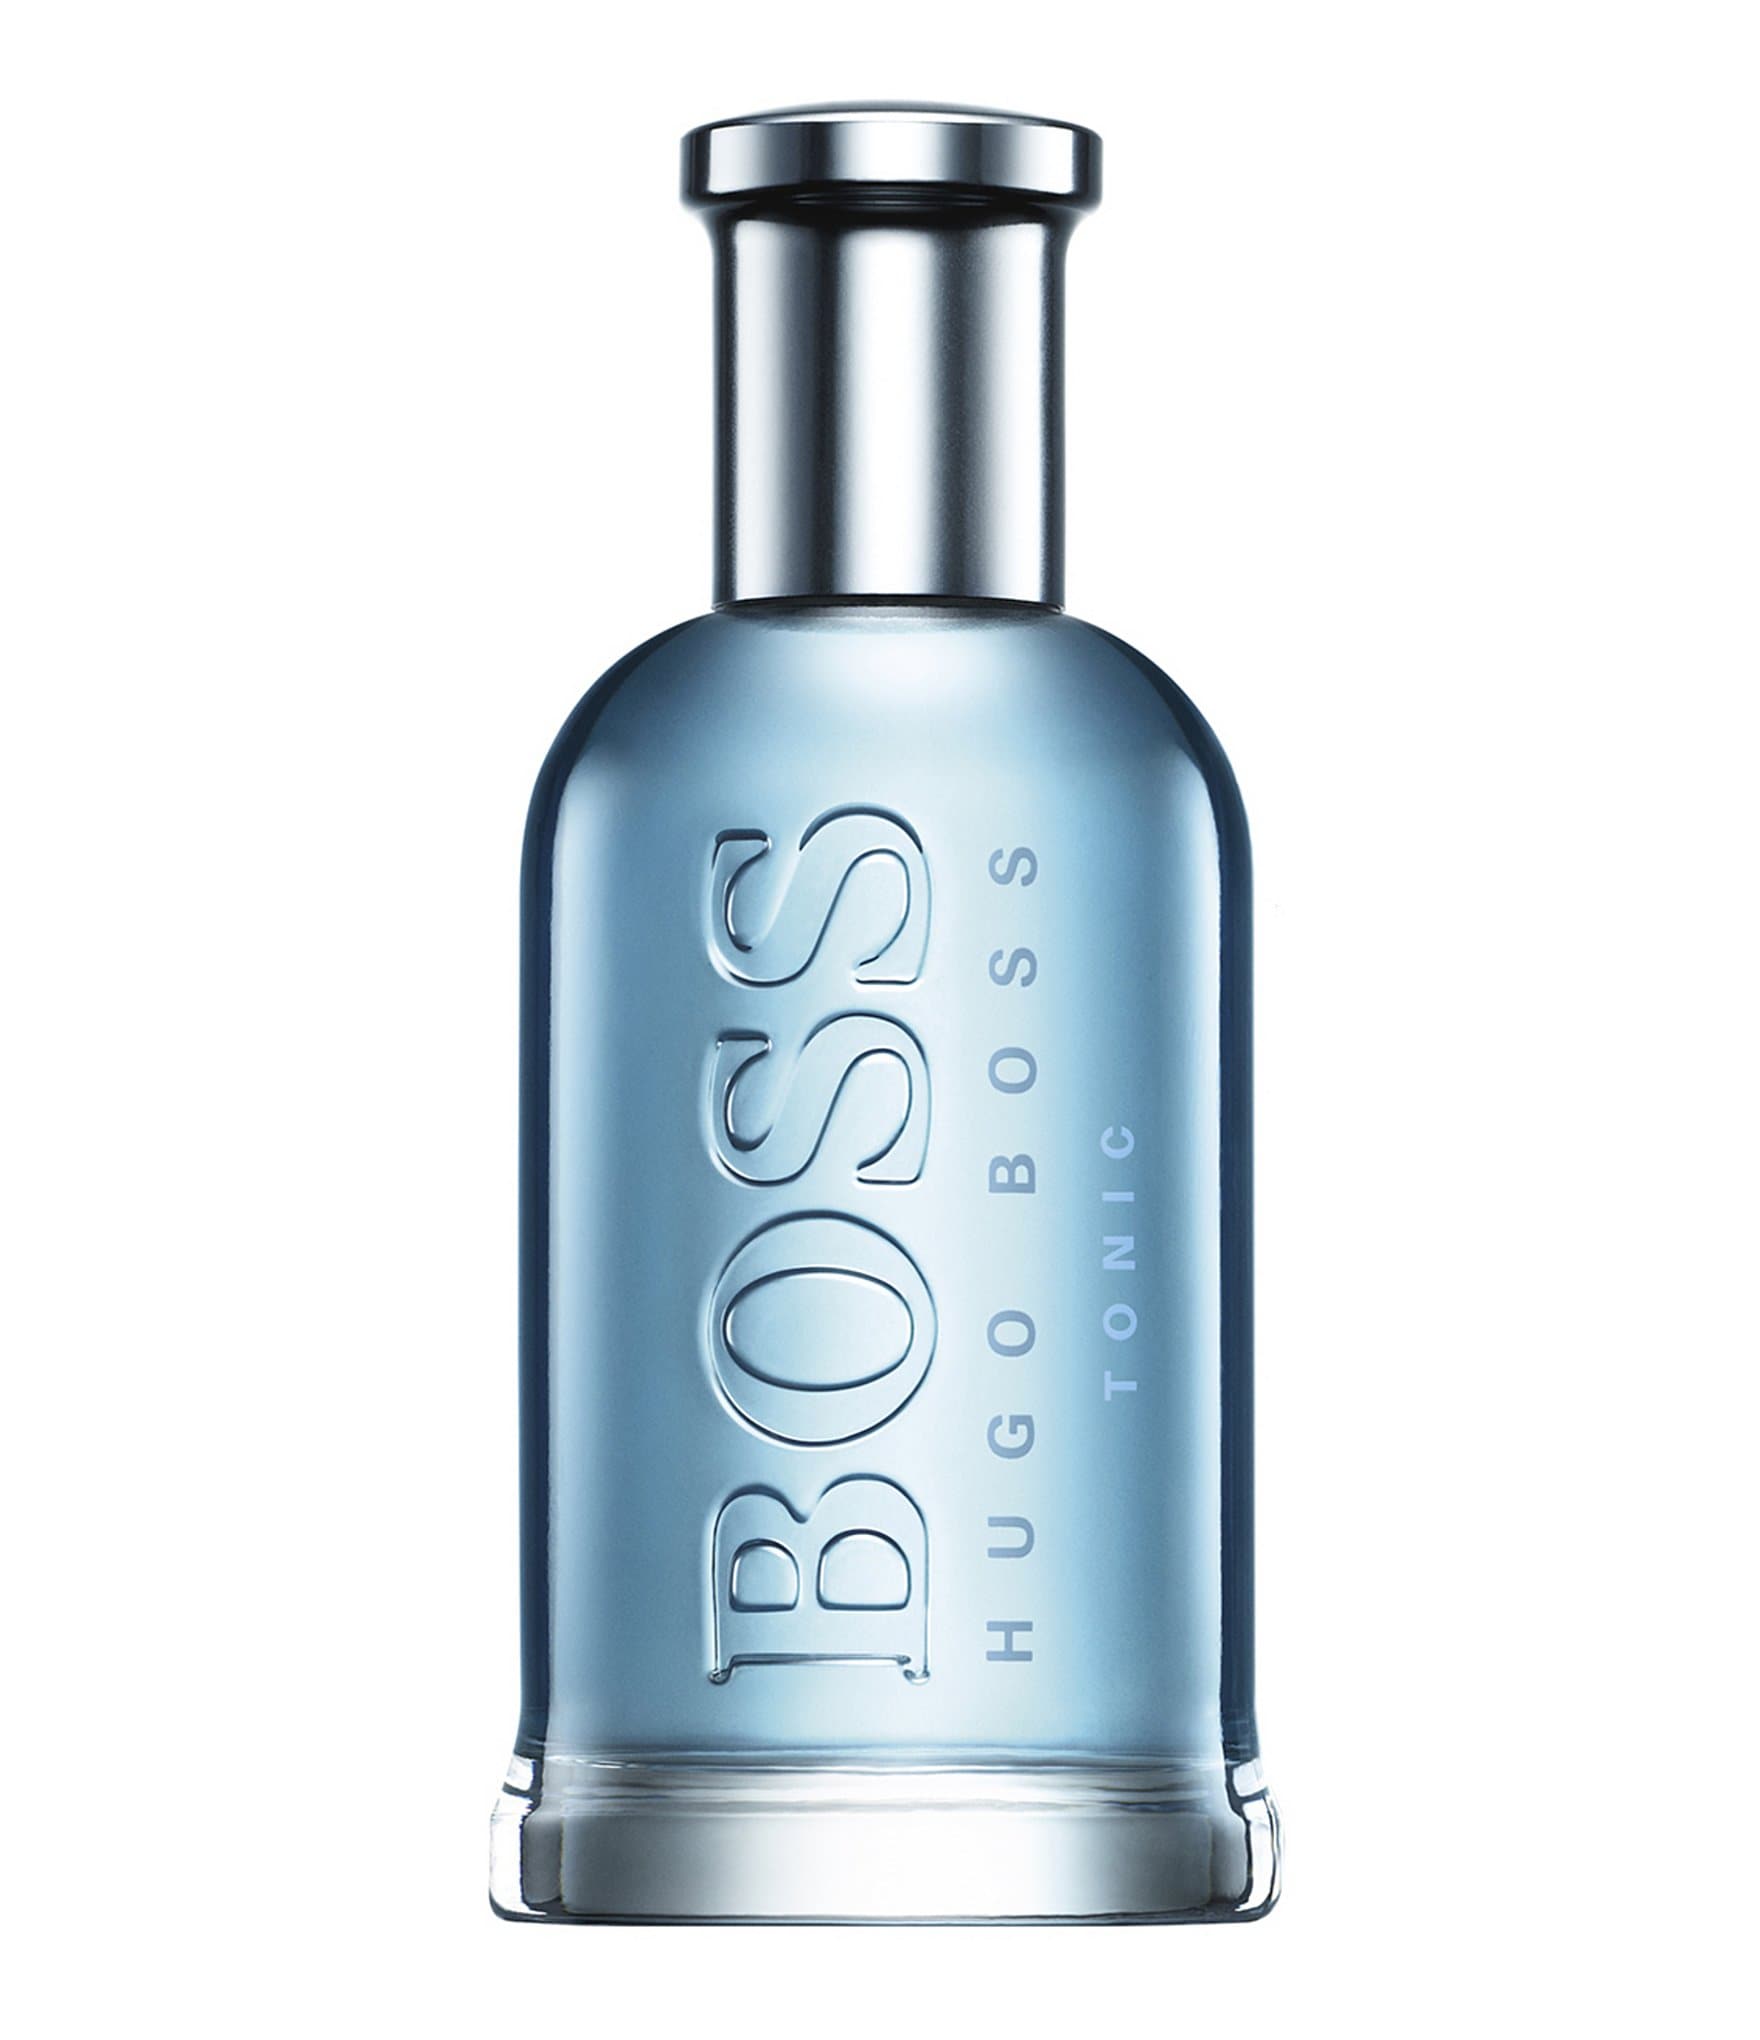 a summer flanker for Boss Bottled?! I stopped by Dillard's and saw